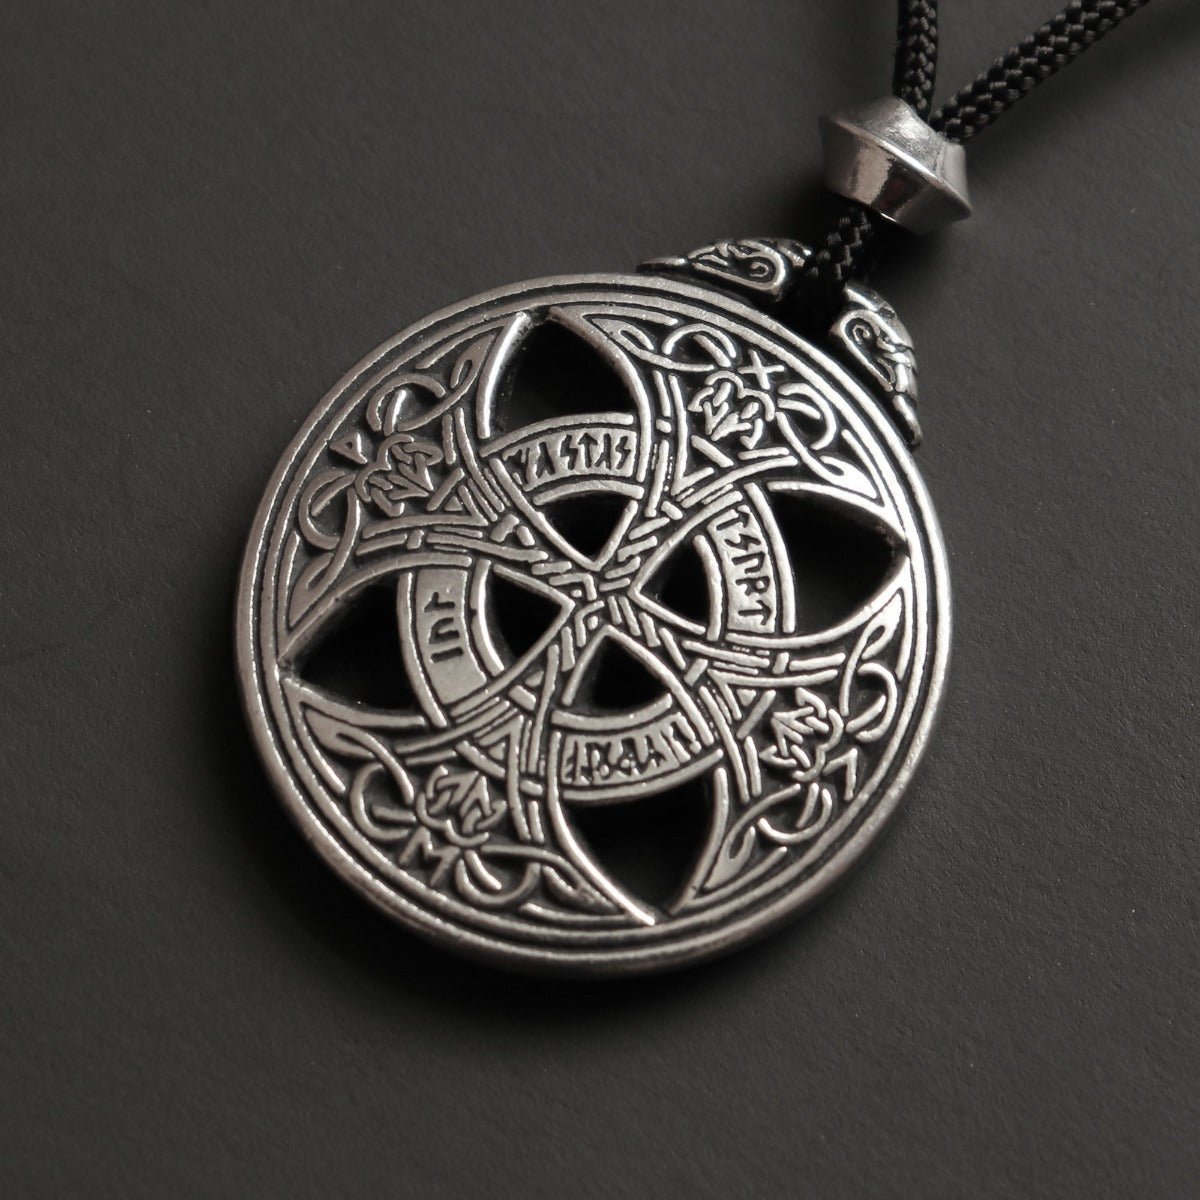 The Runic Love Amulet